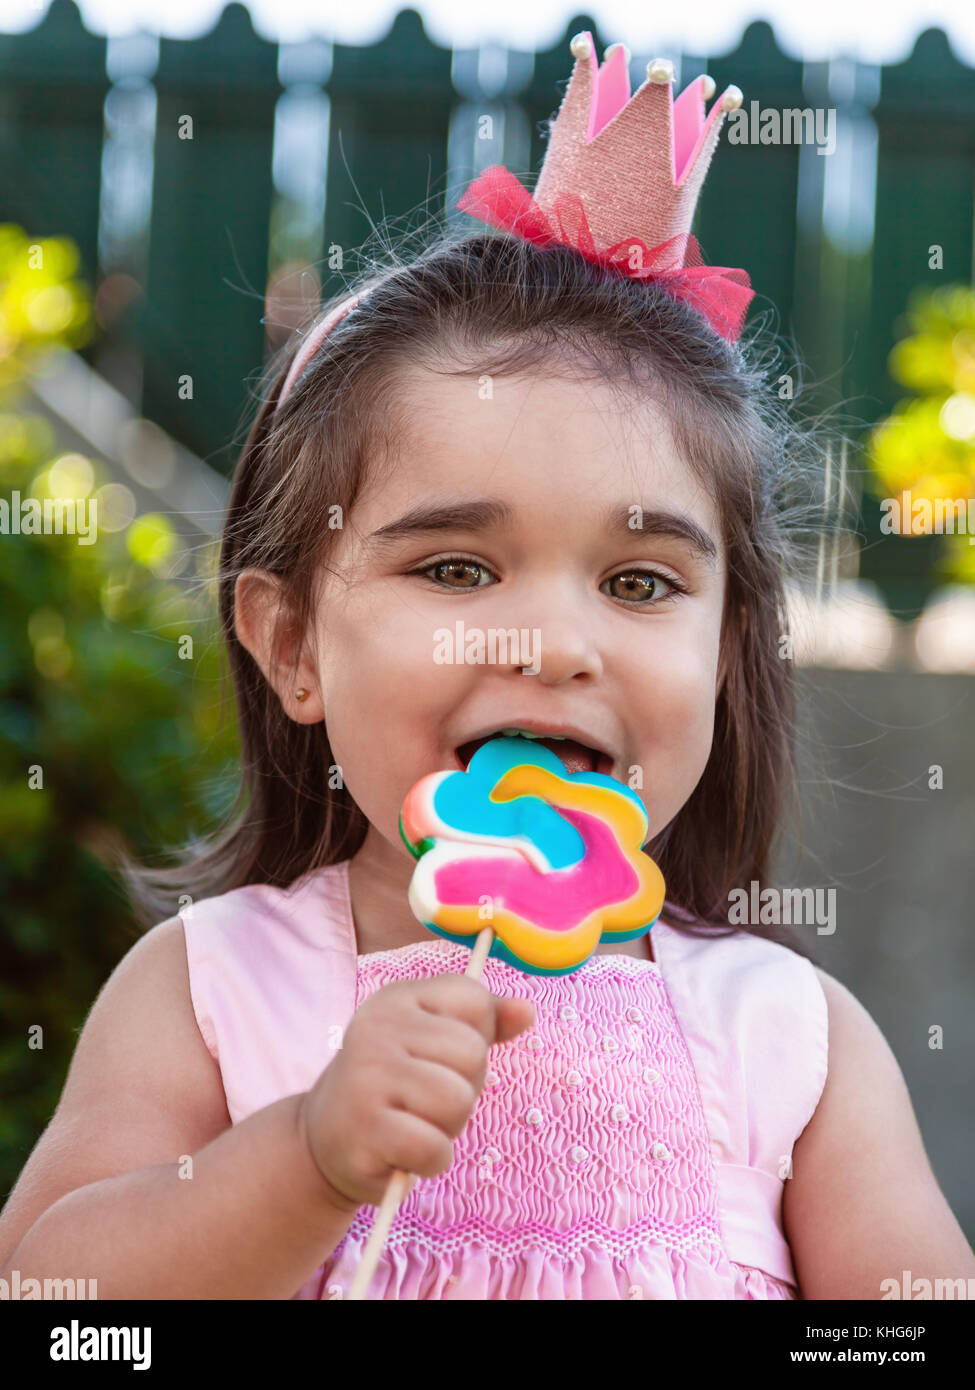 Happy baby toddler girl eating and biting a large colorful lollipop dressed in pink dress as princess or queen with crown, playing outdoor in garden Stock Photo